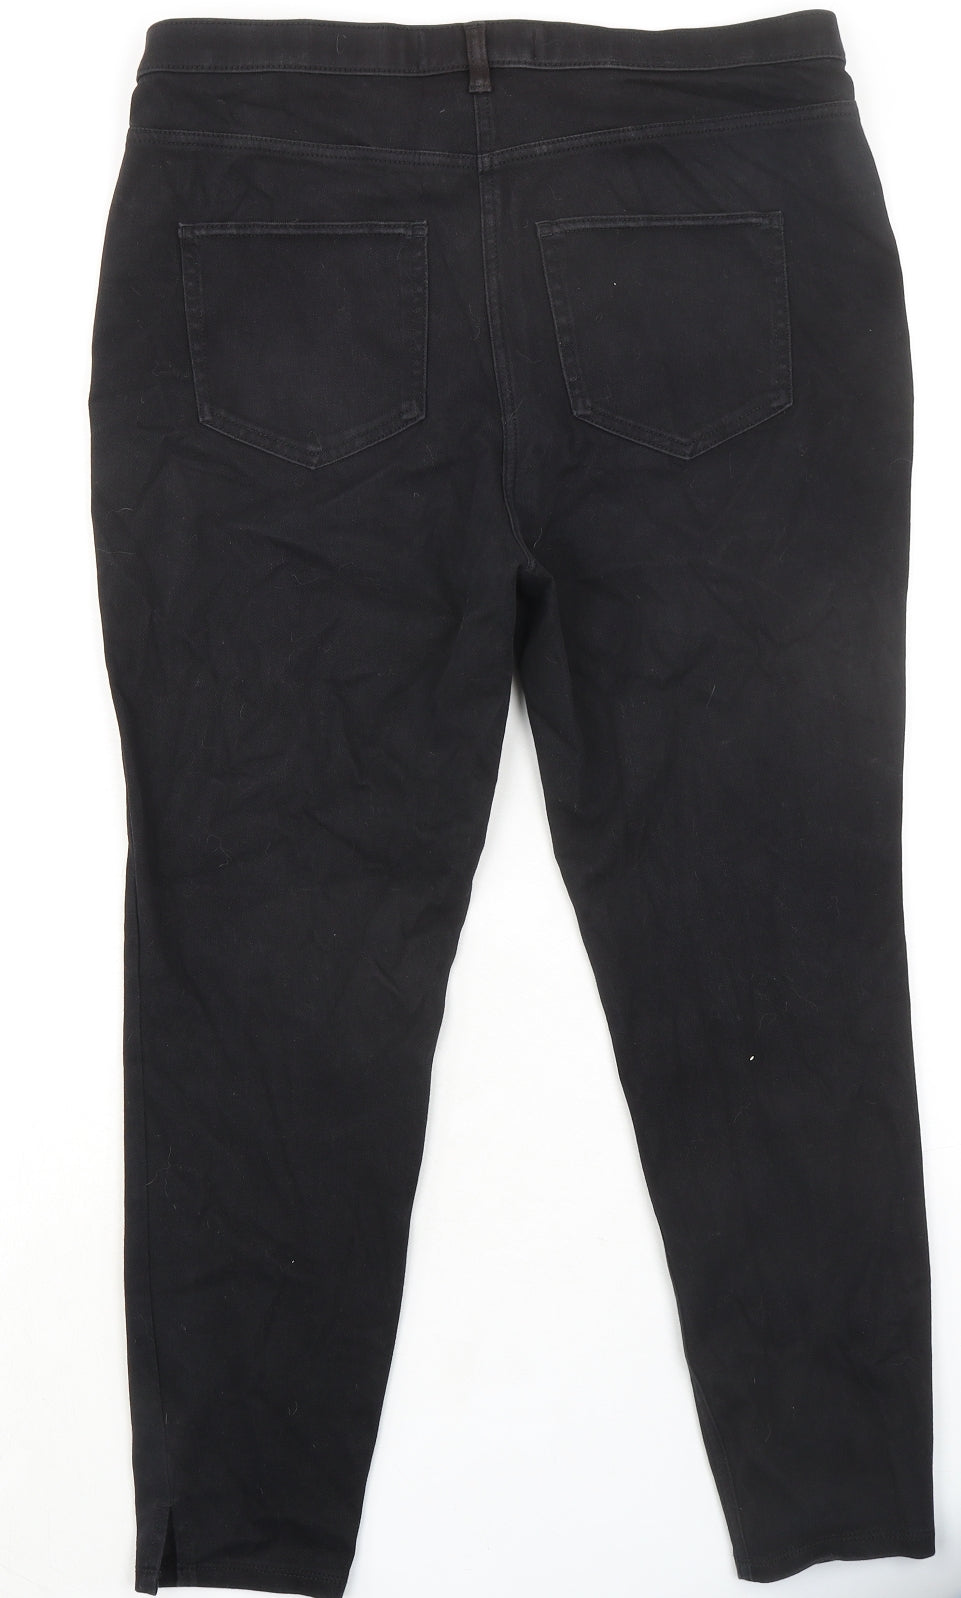 NEXT Womens Black Cotton Jegging Jeans Size 16 L24 in Regular - Cropped